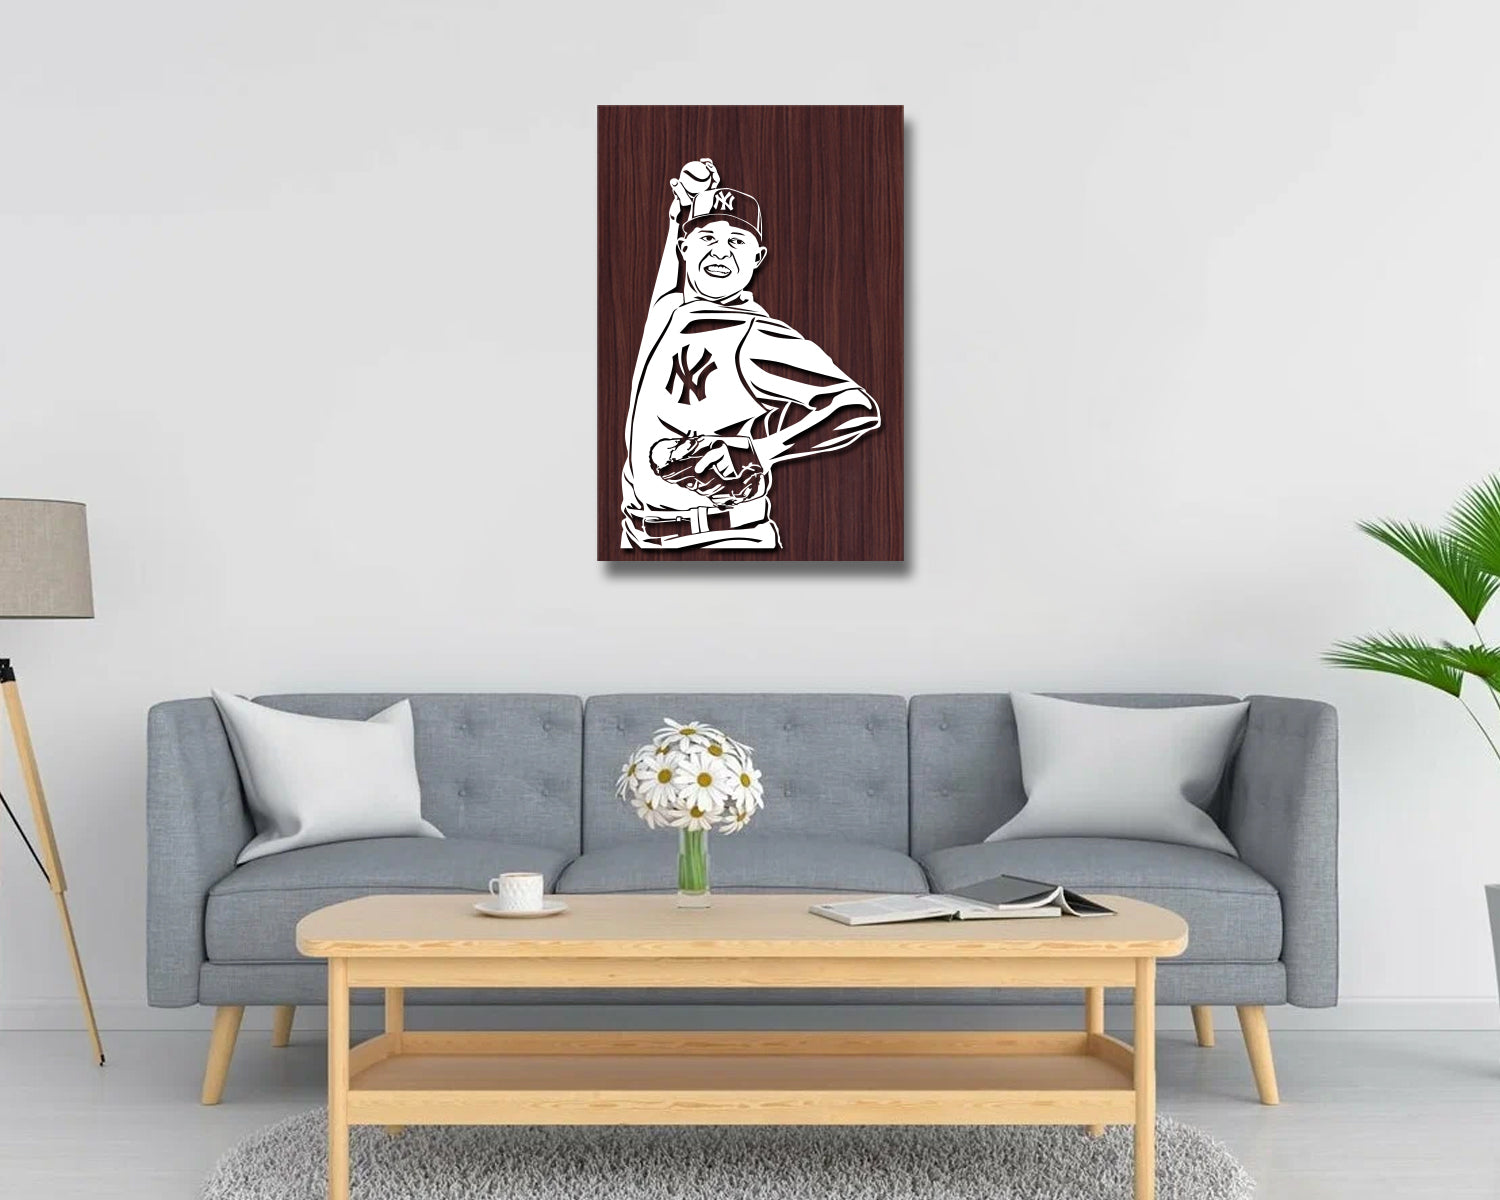 Mariano Rivera LED Wooden Decal 